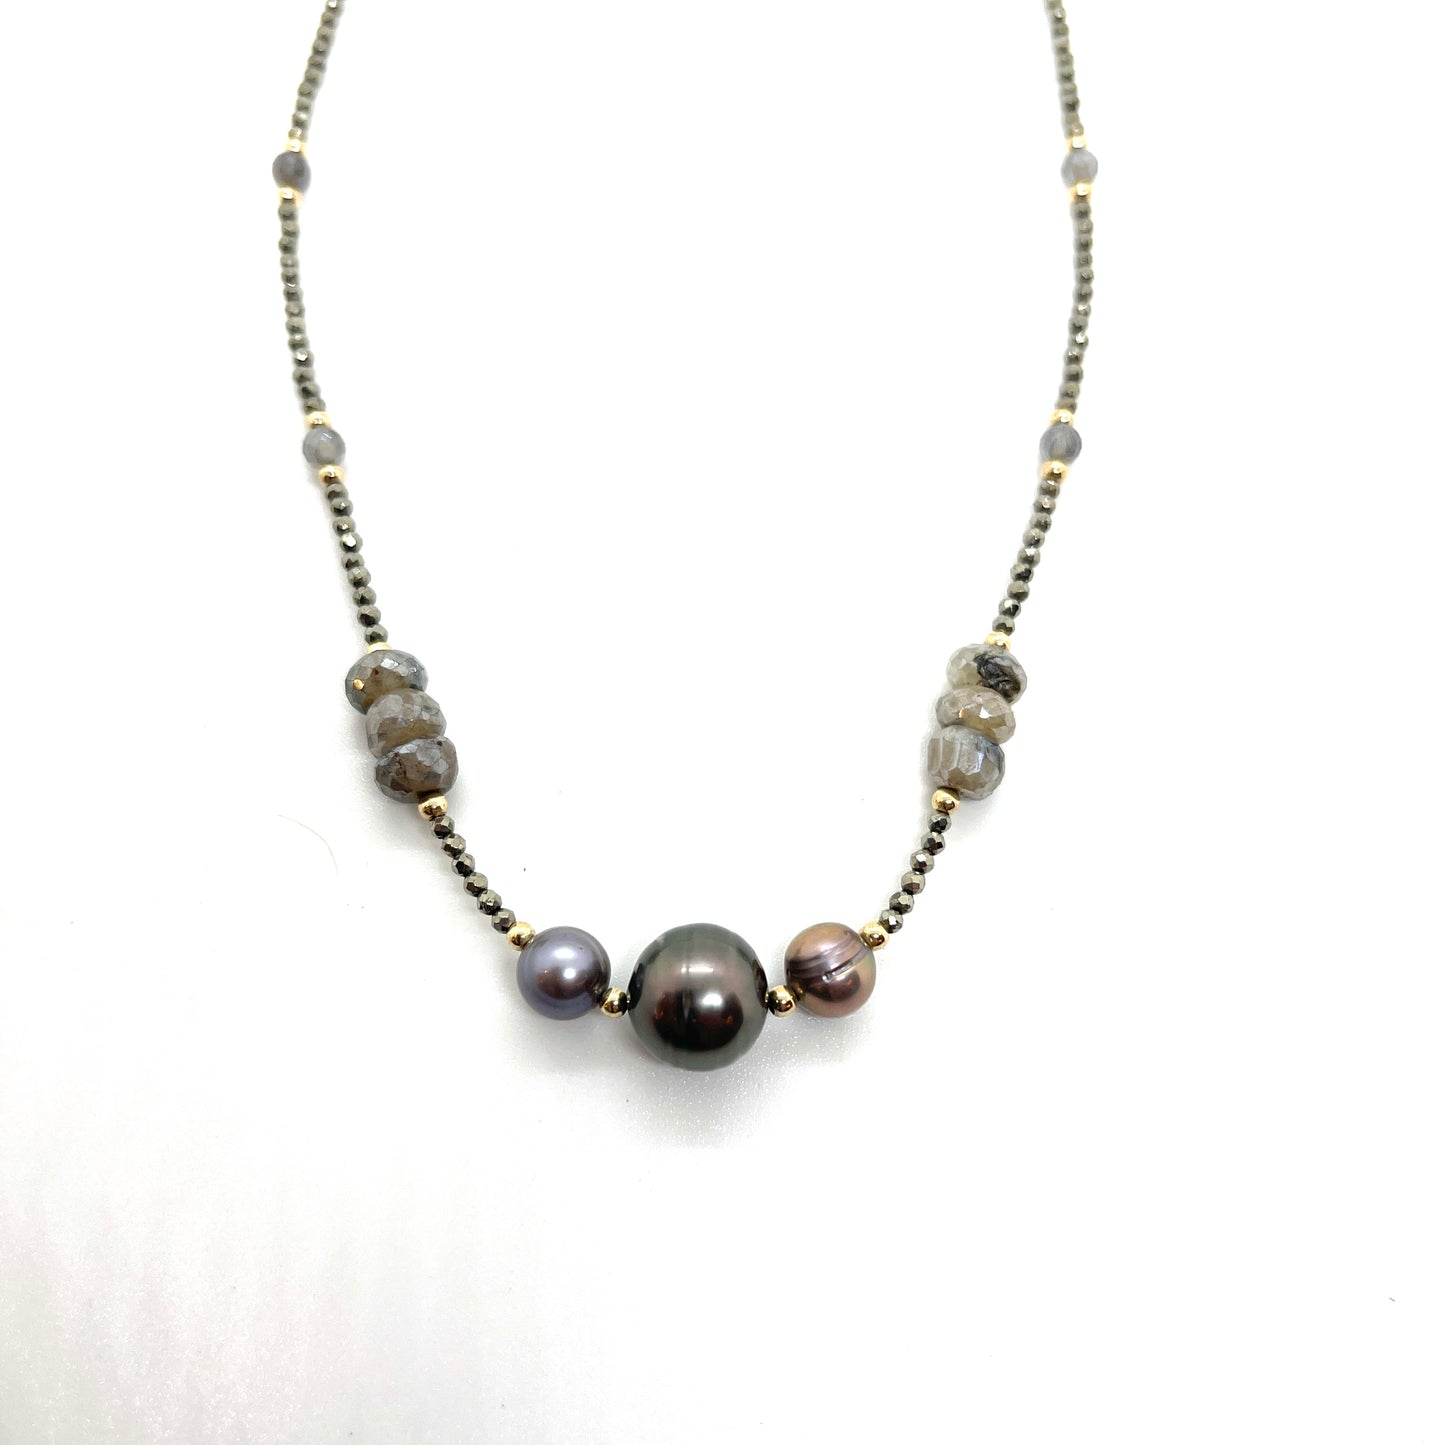 Avaasi Necklace N 2379